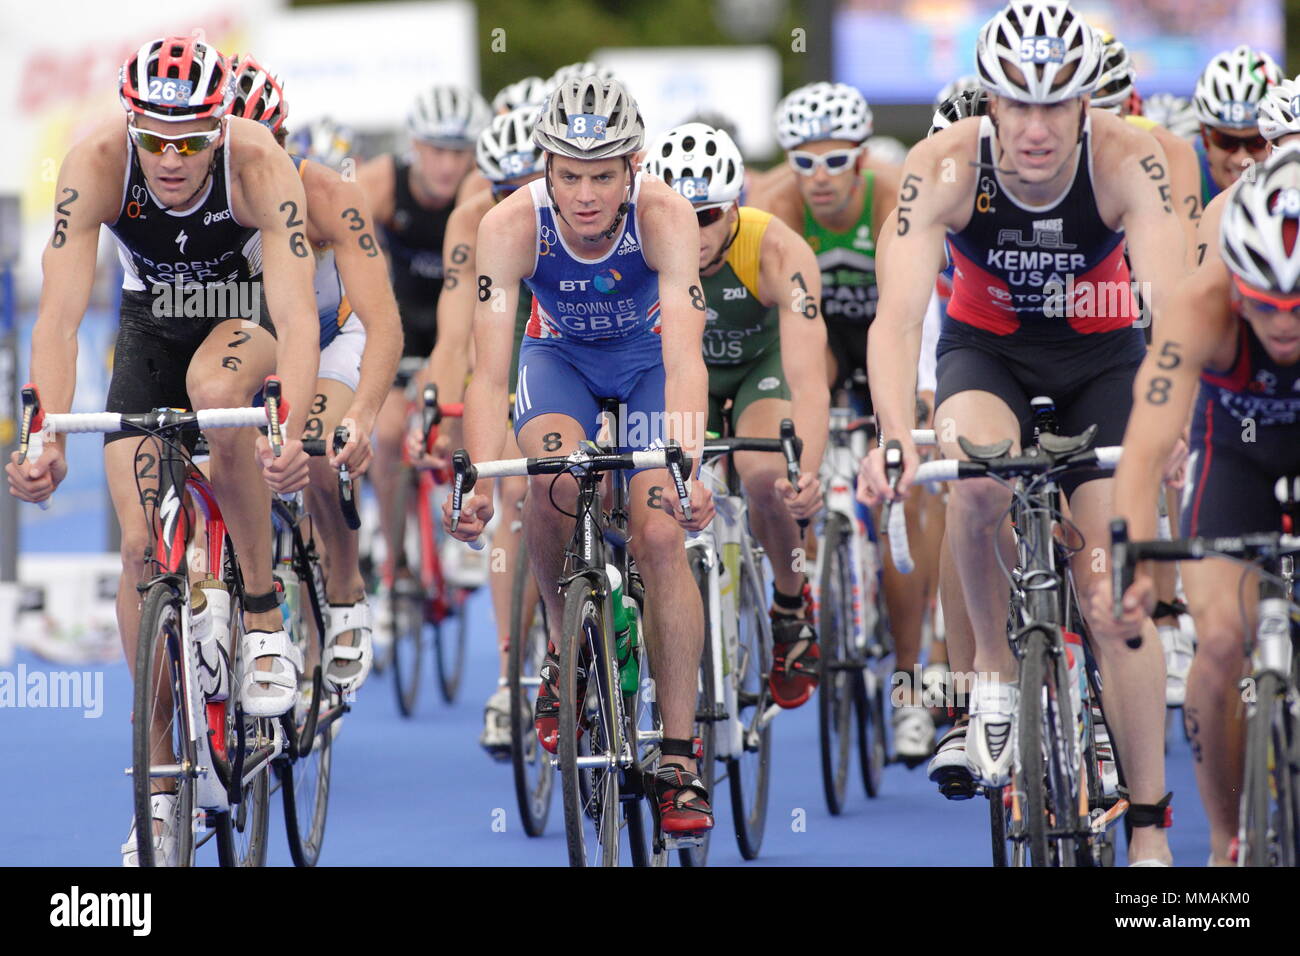 UK - Triathlon - Cycle Stage - Jonathan Brownlee and Jan Frodeno in the  chasing pack at the cycle stage, Elite Men ITU World Championship Dextro  Energy Triathlon London, 7 August 2011 Stock Photo - Alamy